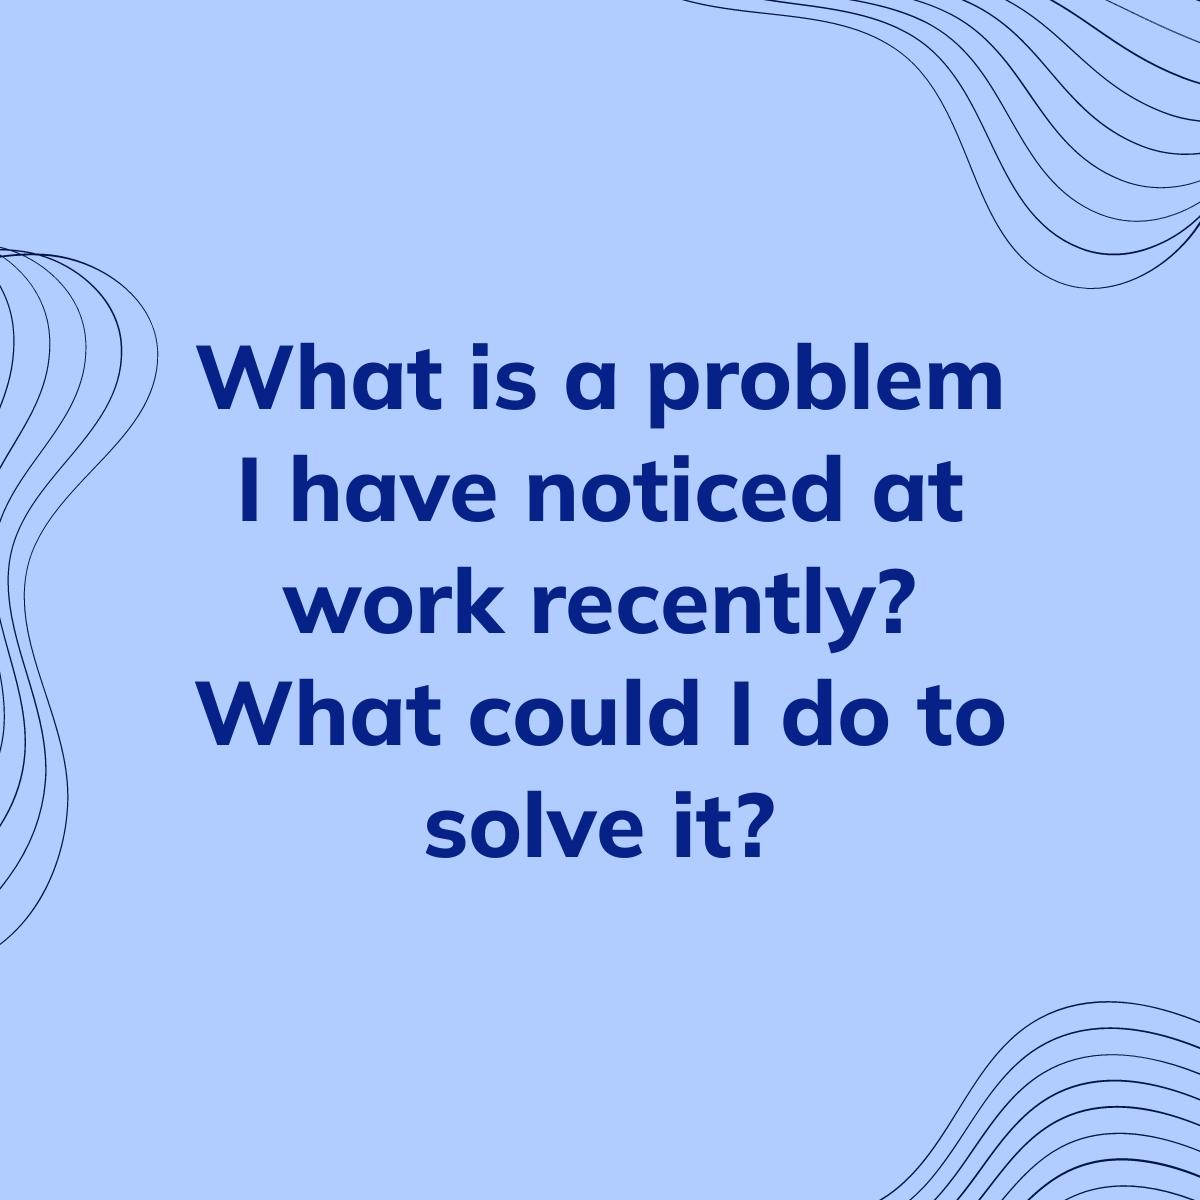 Journal Prompt: What is a problem I have noticed at work recently? What could I do to solve it?